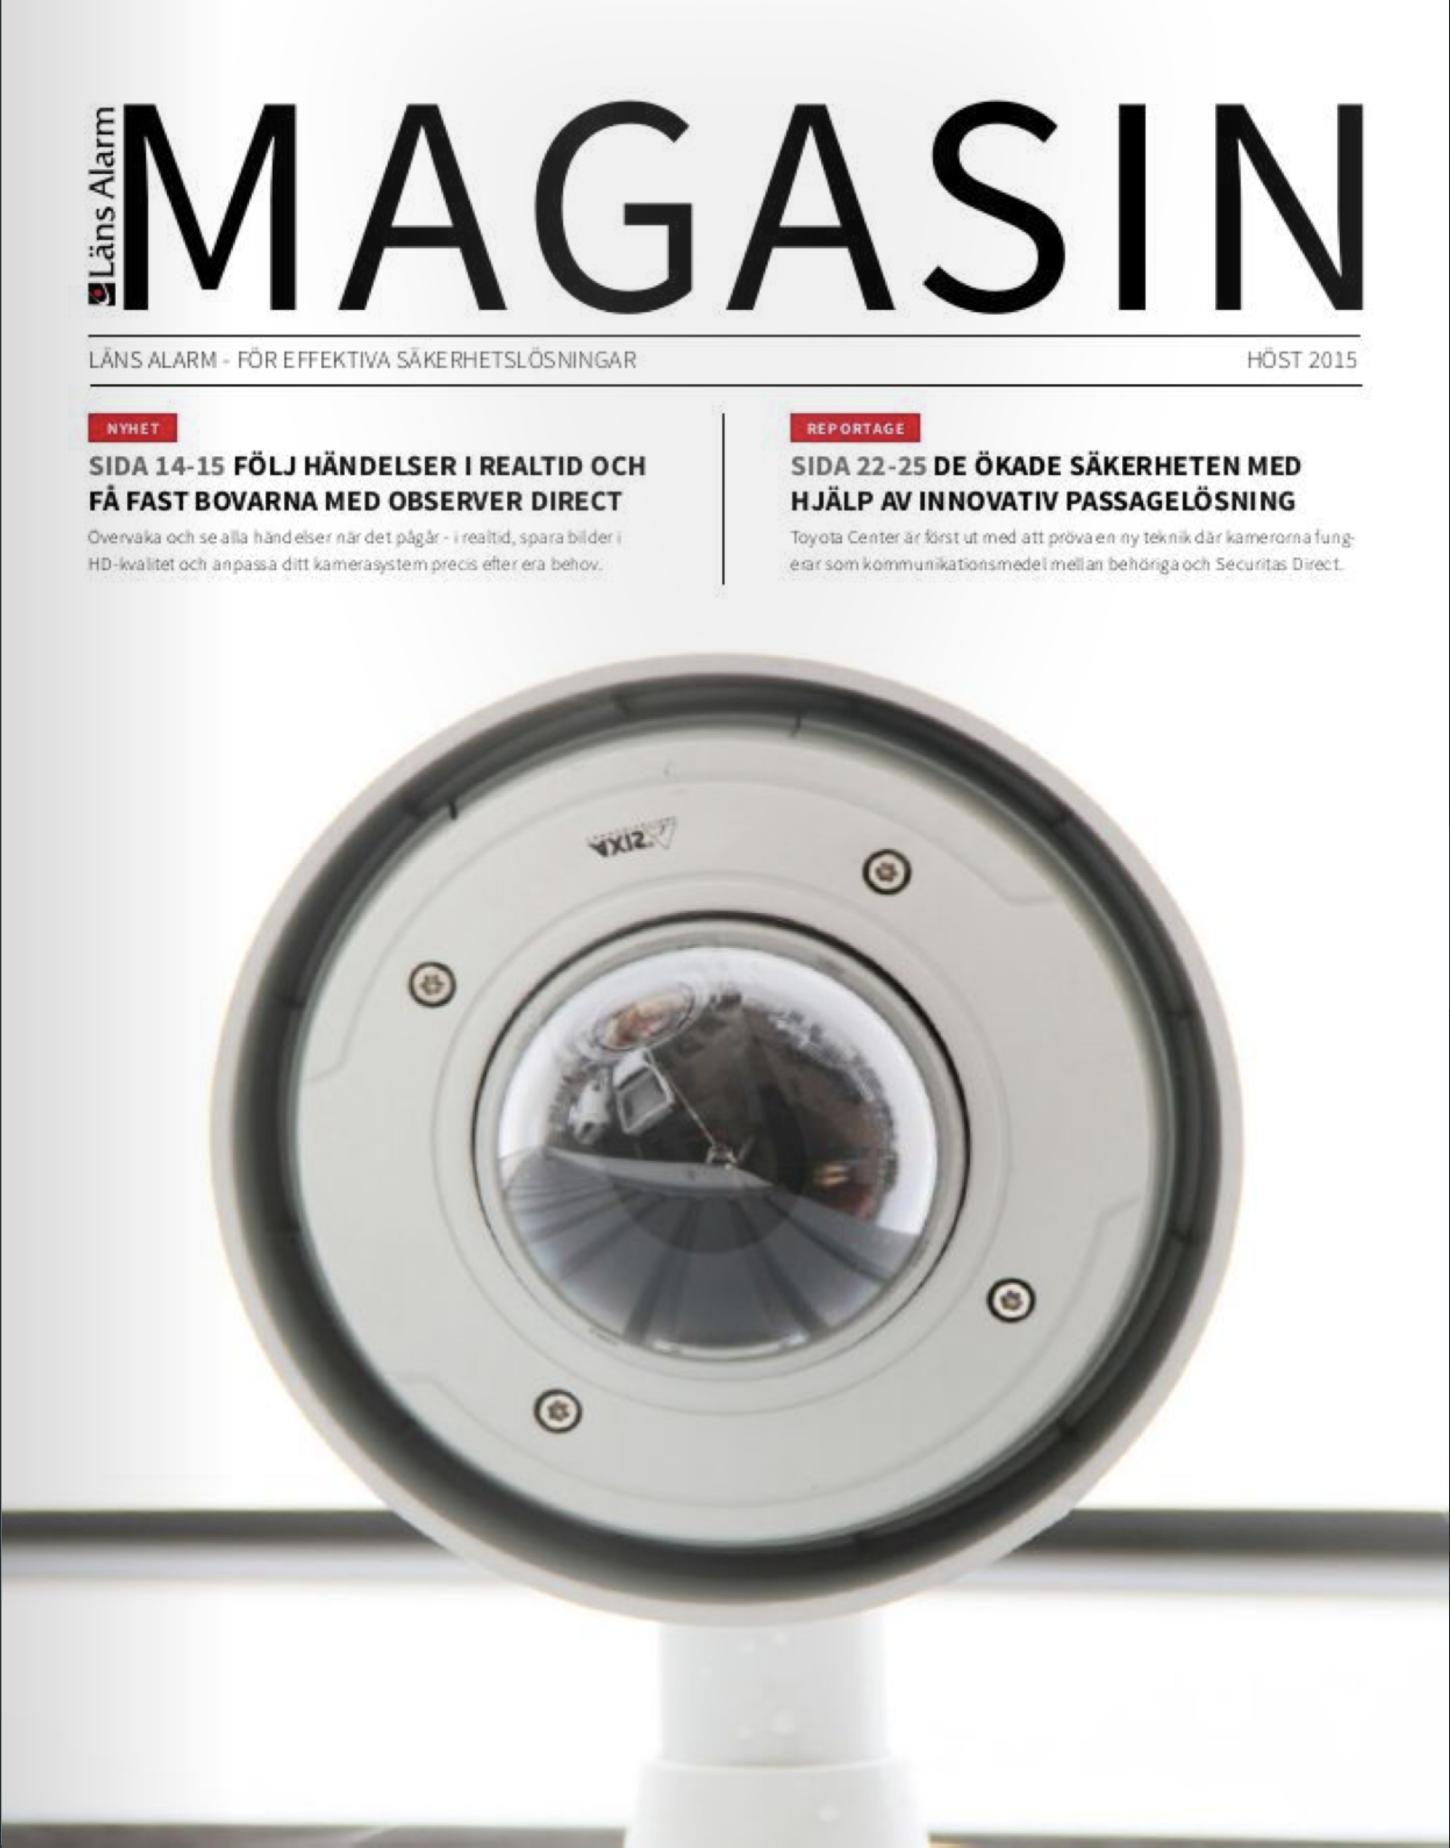 Magasin #1